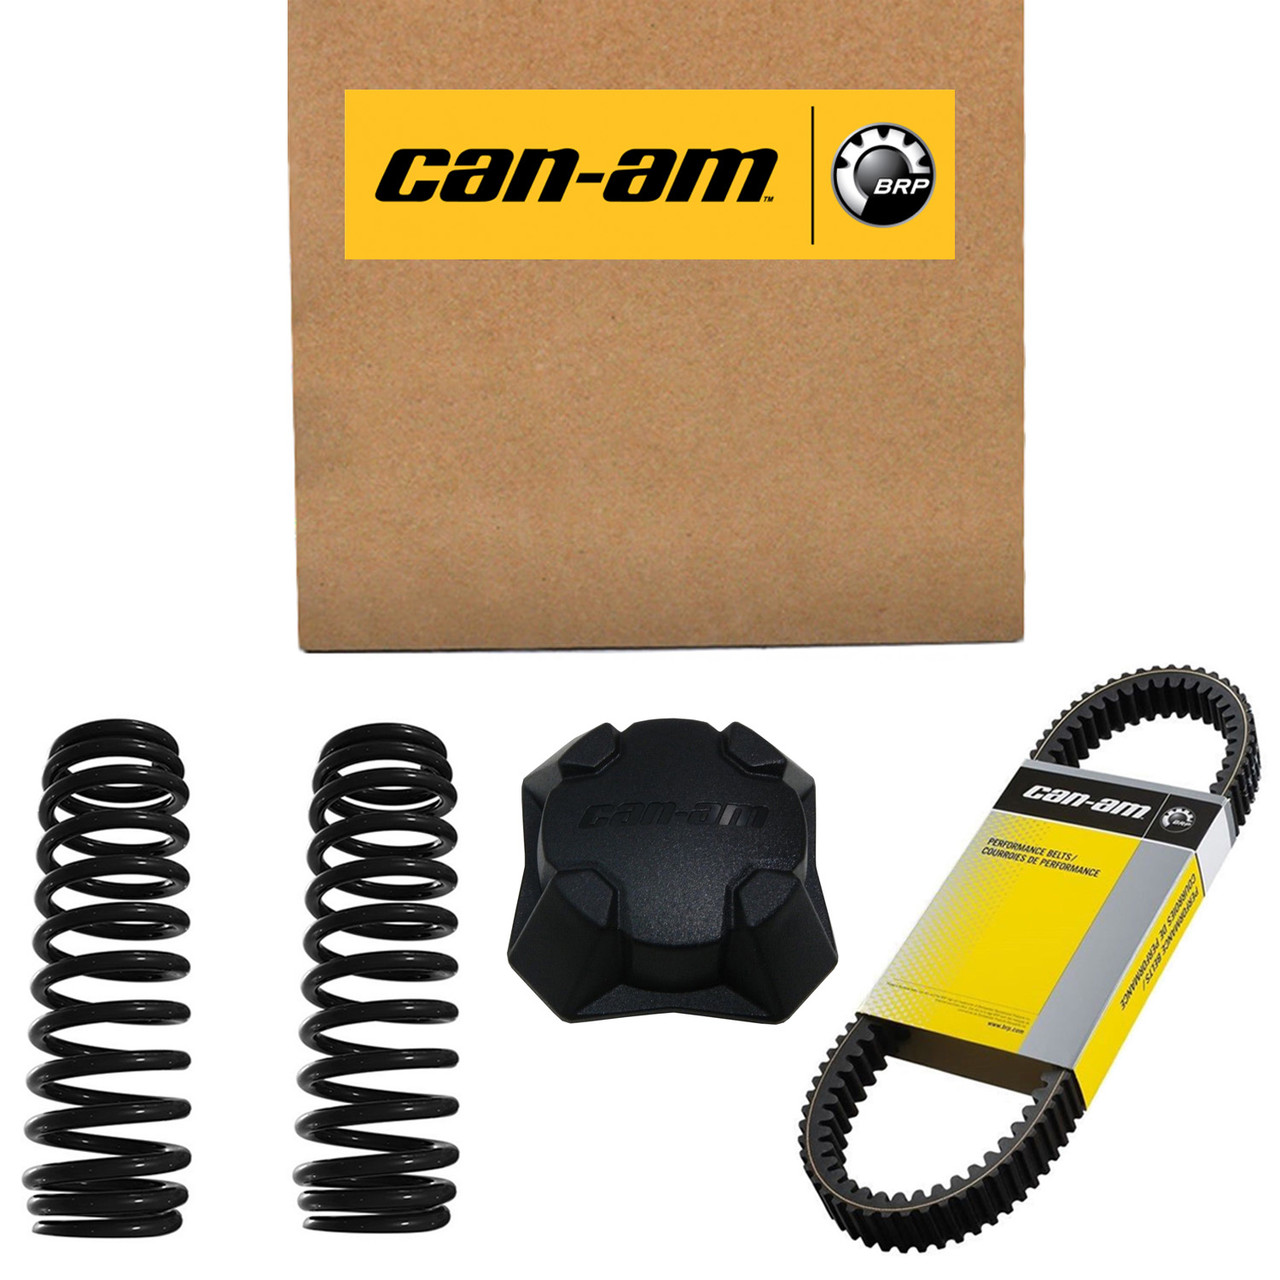 Can-Am New OEM Wiring Kit, 715001995